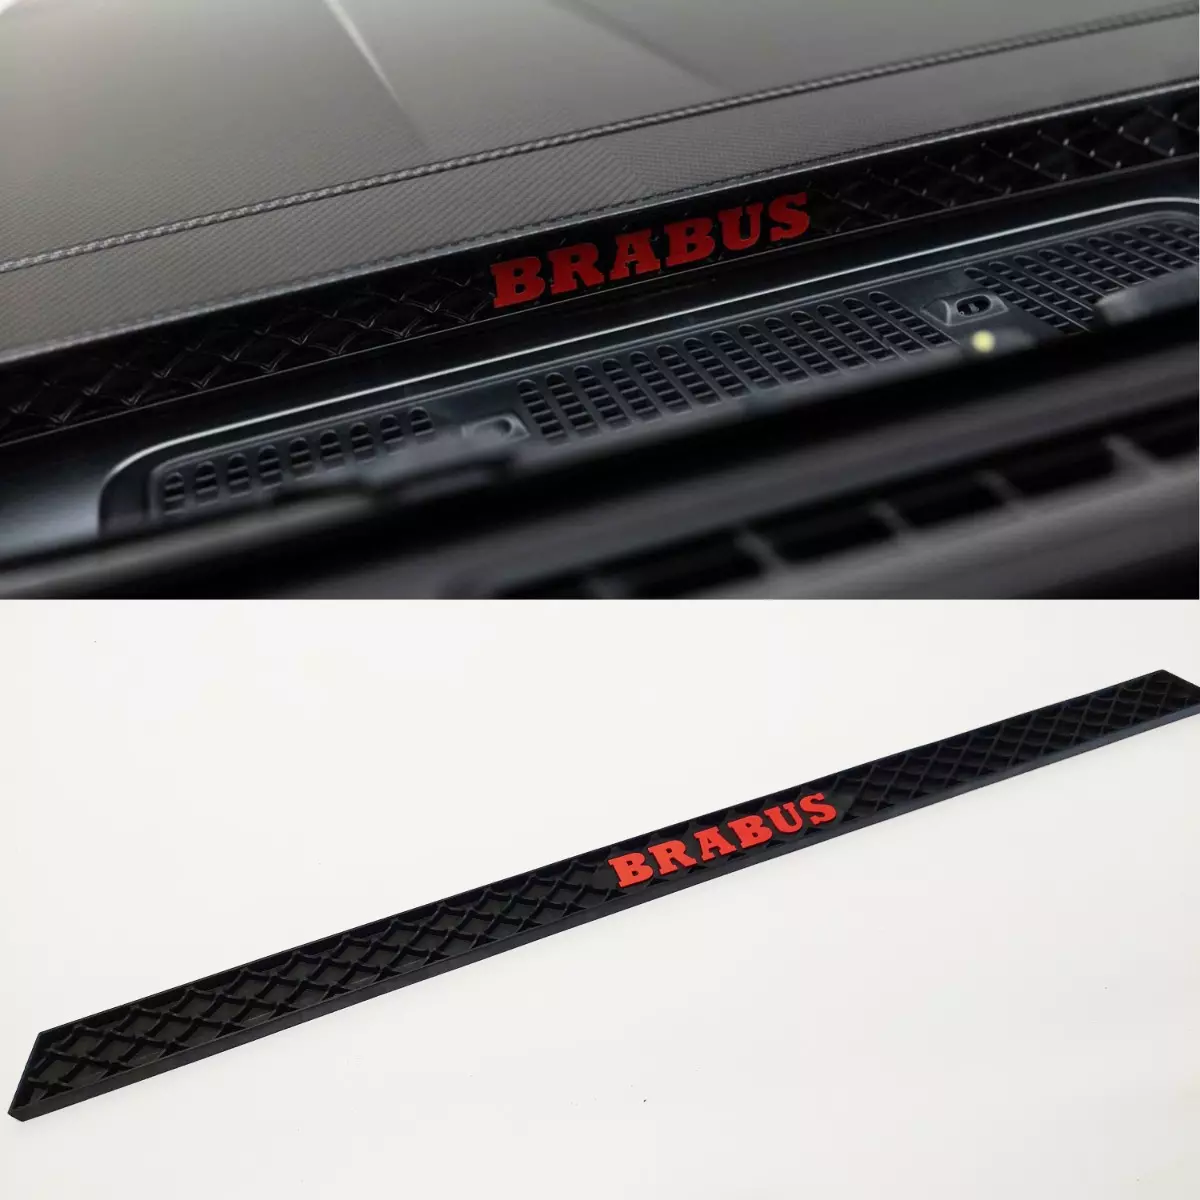 Plastic Brabus Red Hood Scoop Tail Mesh for Mercedes Benz G class W464 W463a G63 G500 G350